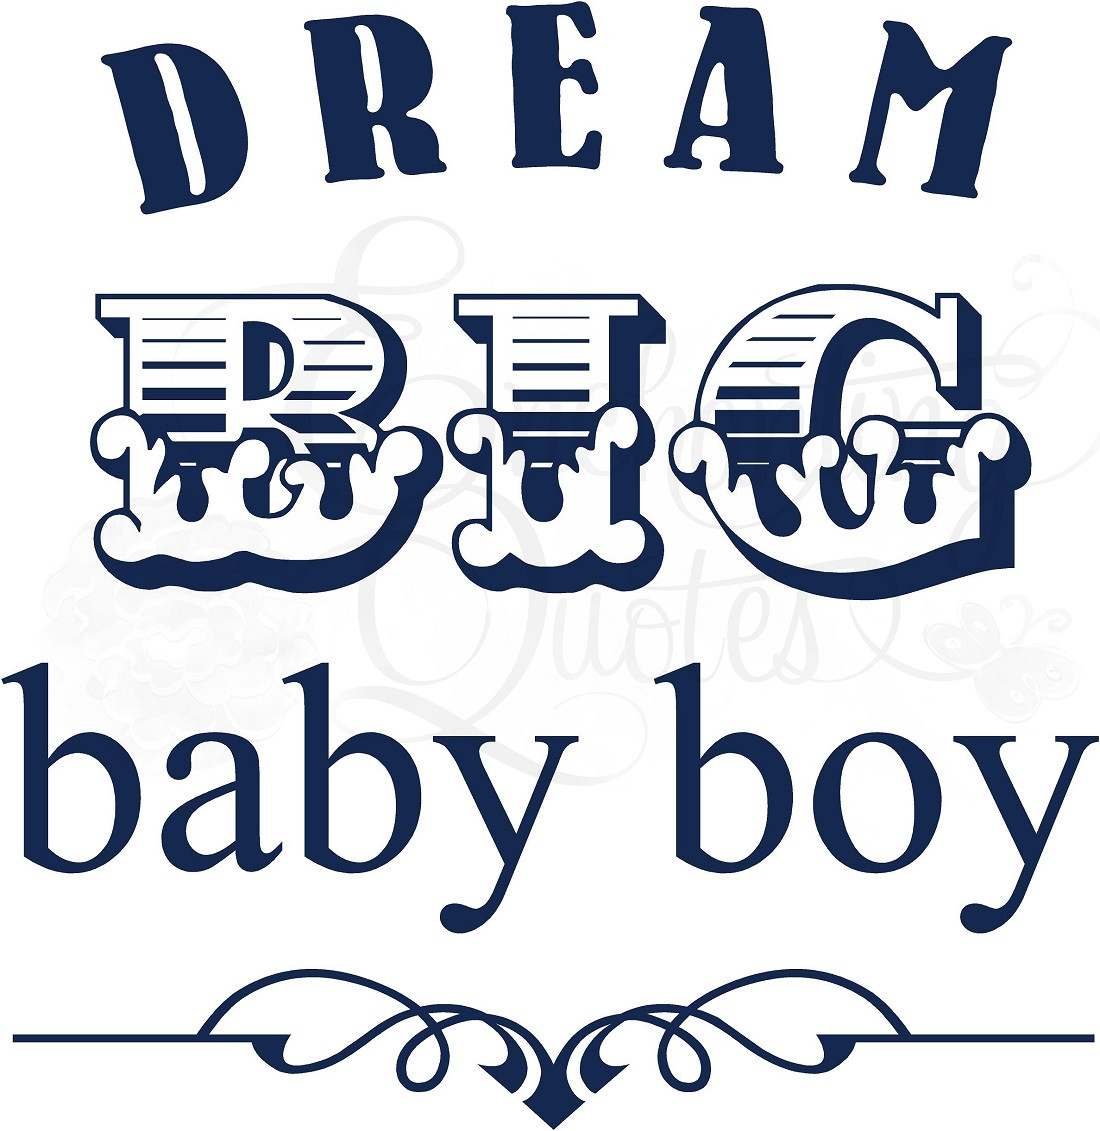 Baby Boys Quotes
 Baby Boy Quotes And Sayings QuotesGram